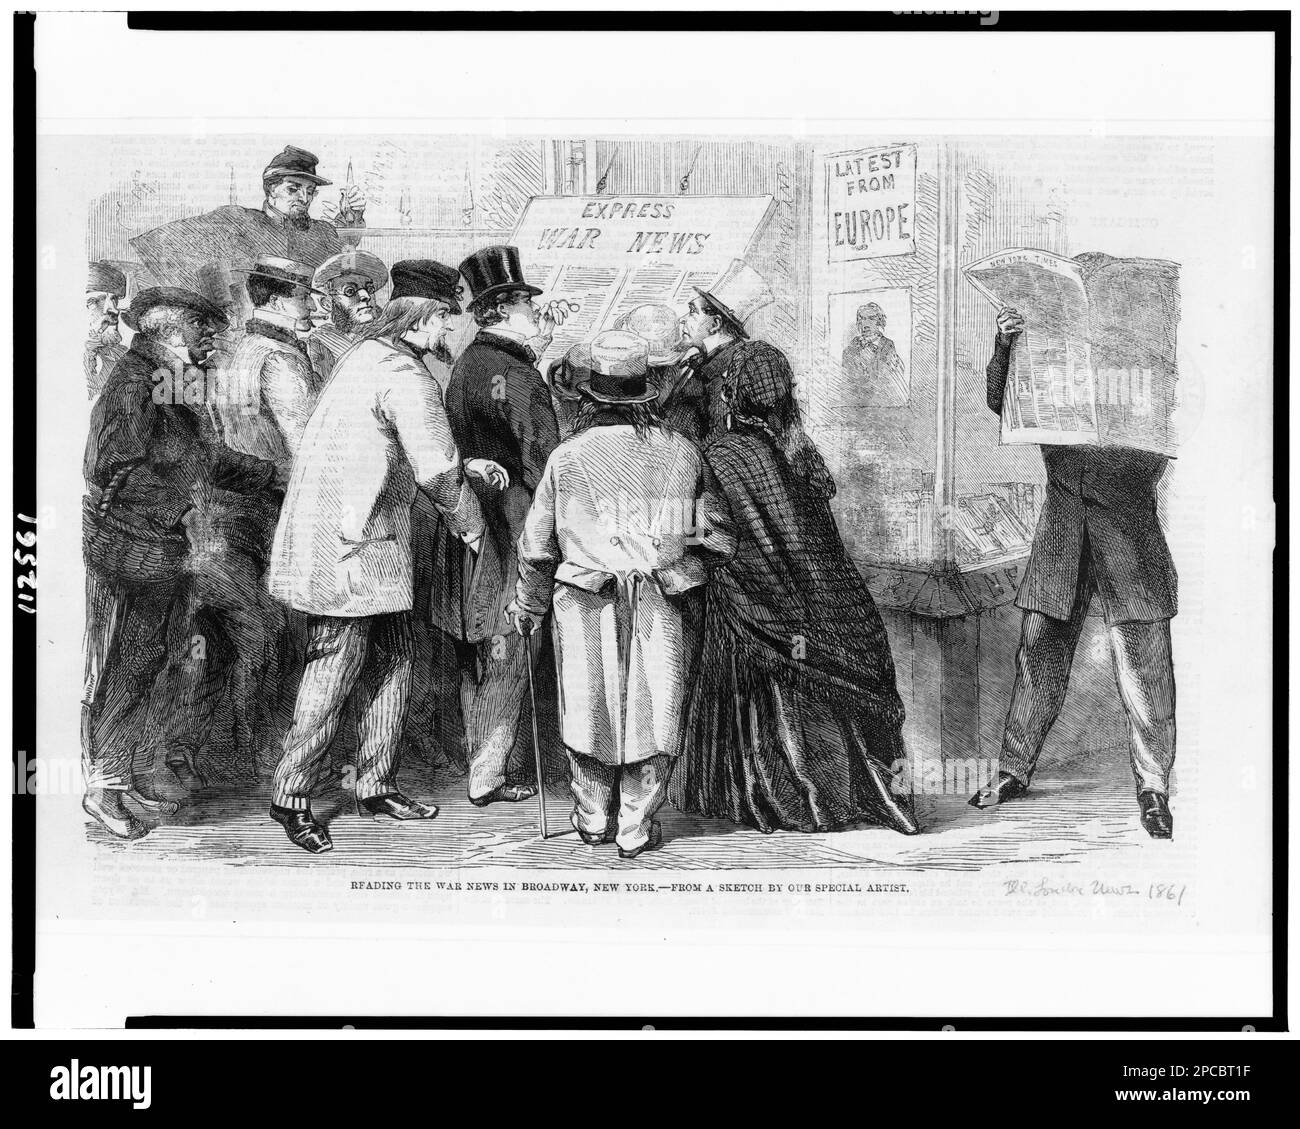 Reading the war news in Broadway, New York / /from a sketch by our special artist.. Illustration from: Illustrated London news, 1861. United States, History, Civil War, 1861-1865, Communications, Newspapers, New York (State), New York, 1860-1870. Stock Photo